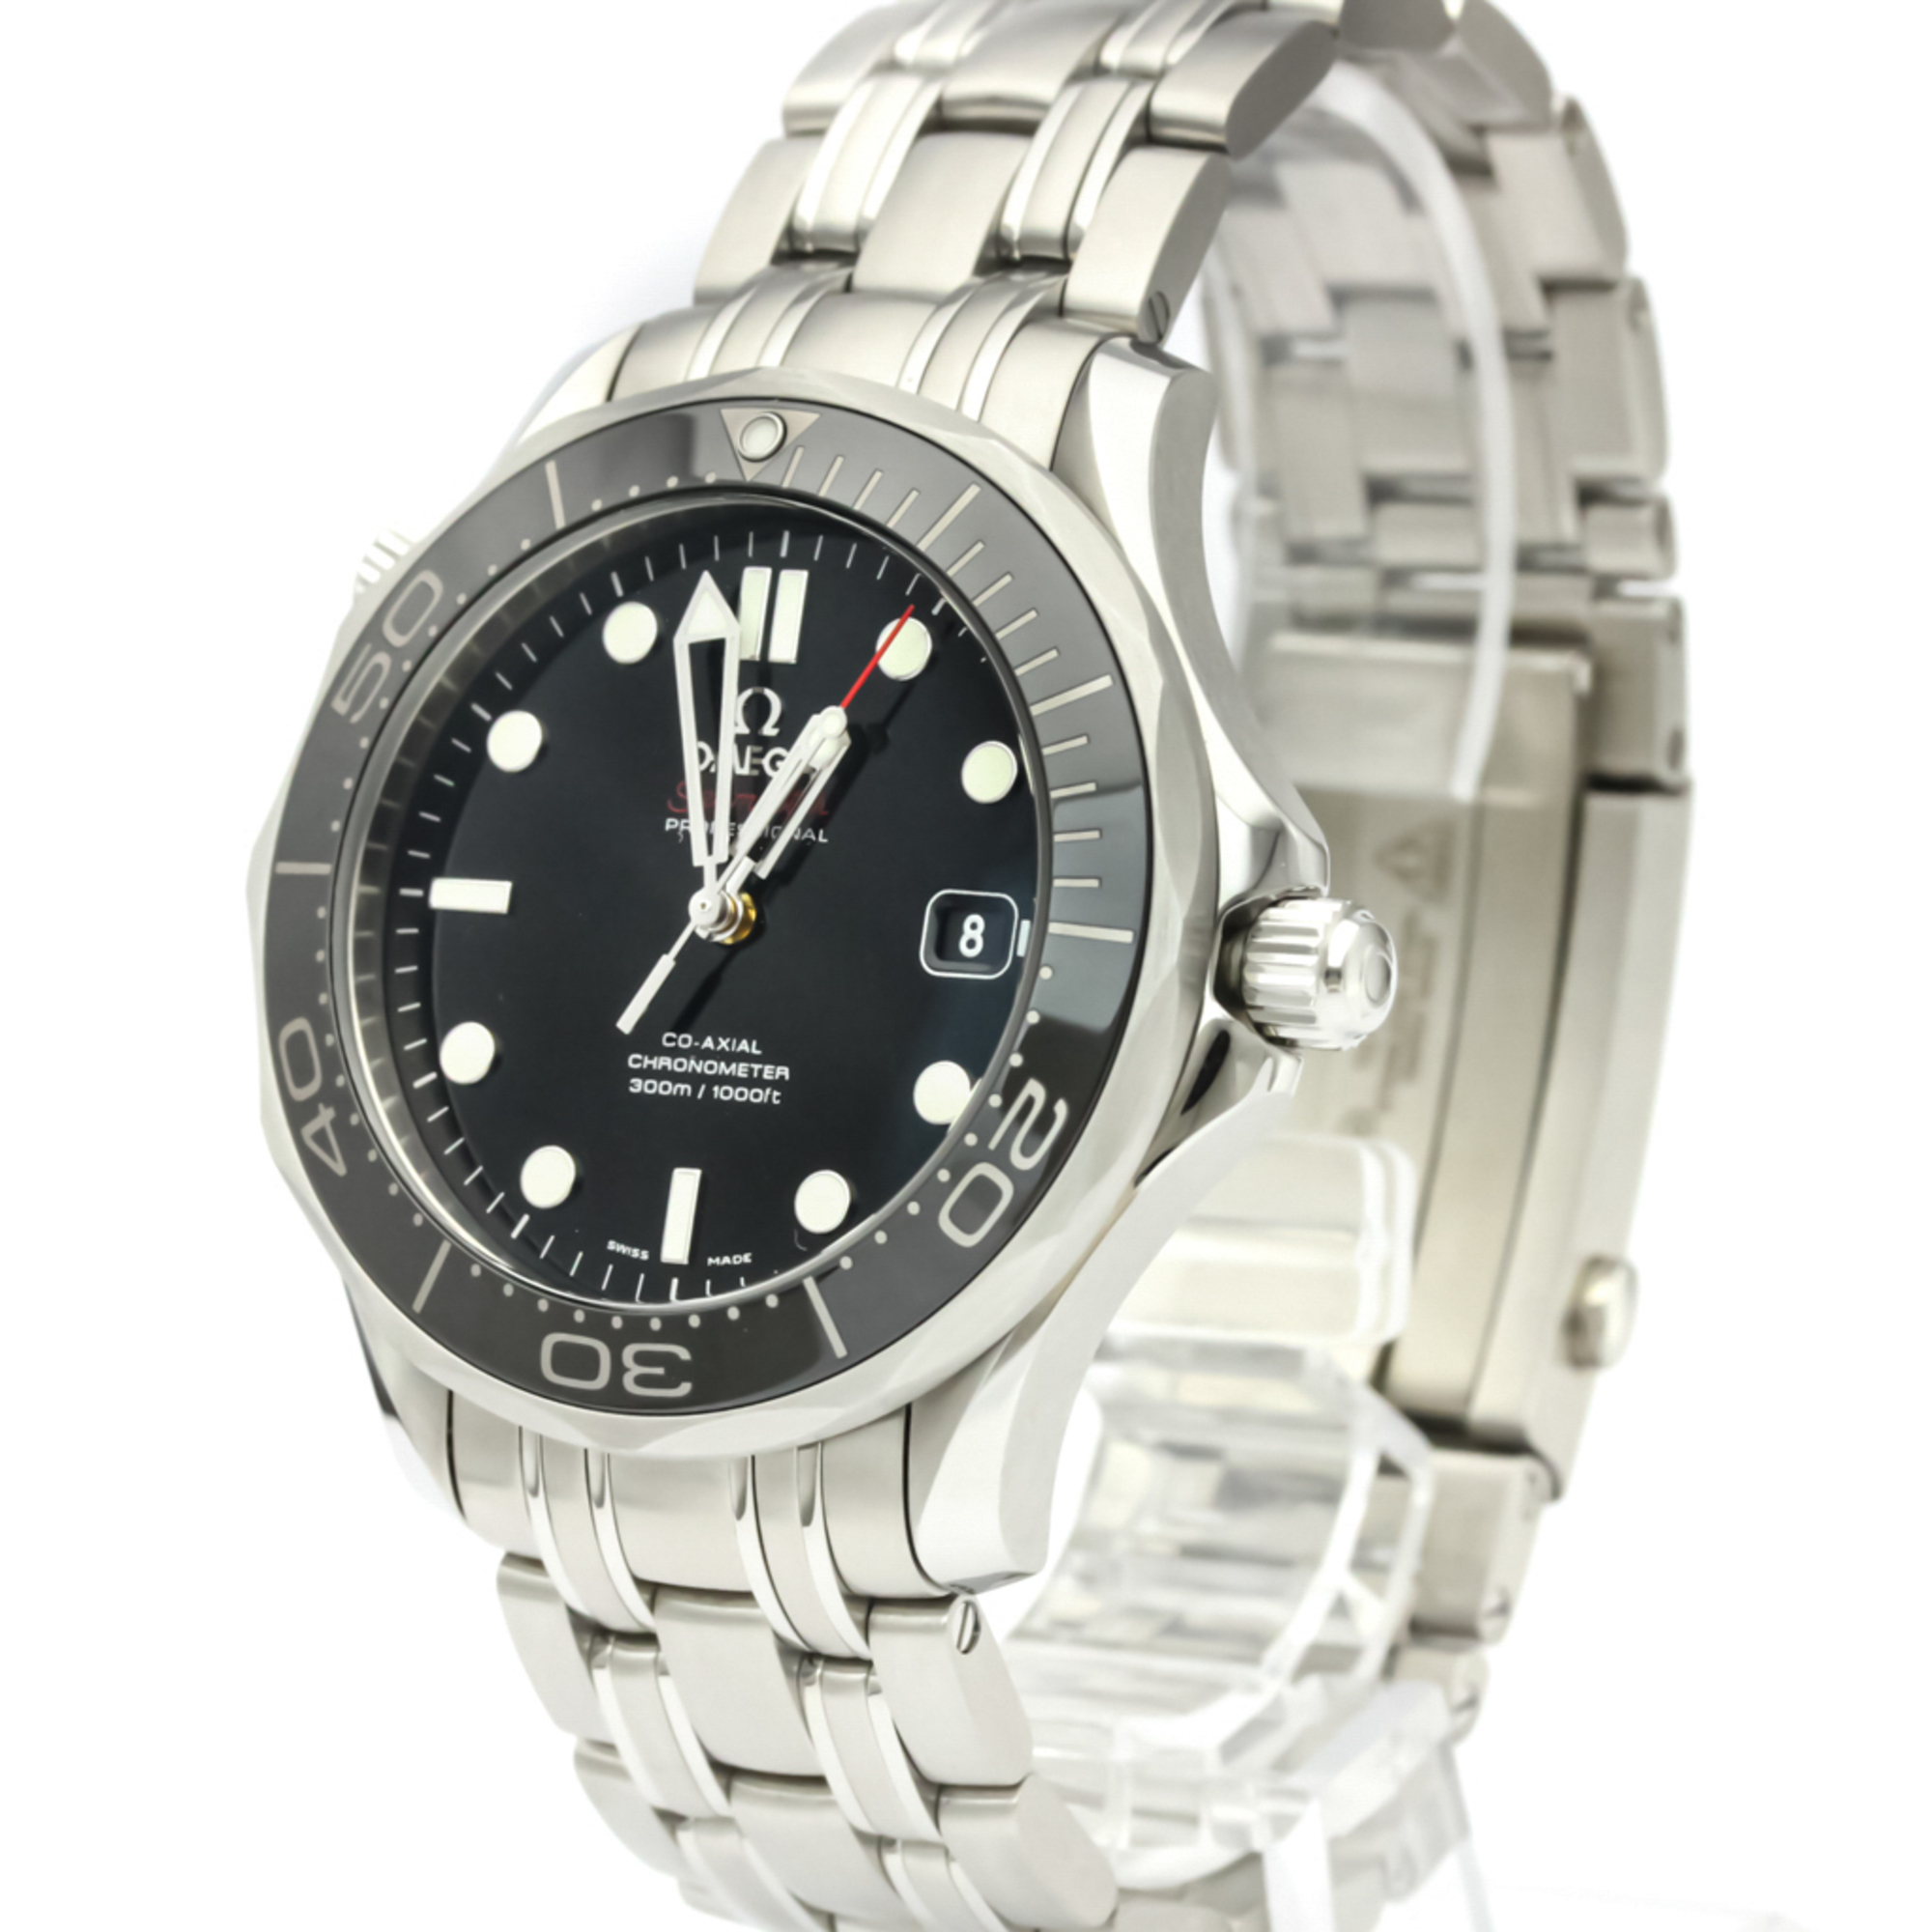 OMEGA Seamaster Diver 300M Co-Axial Watch 212.30.41.20.01.003